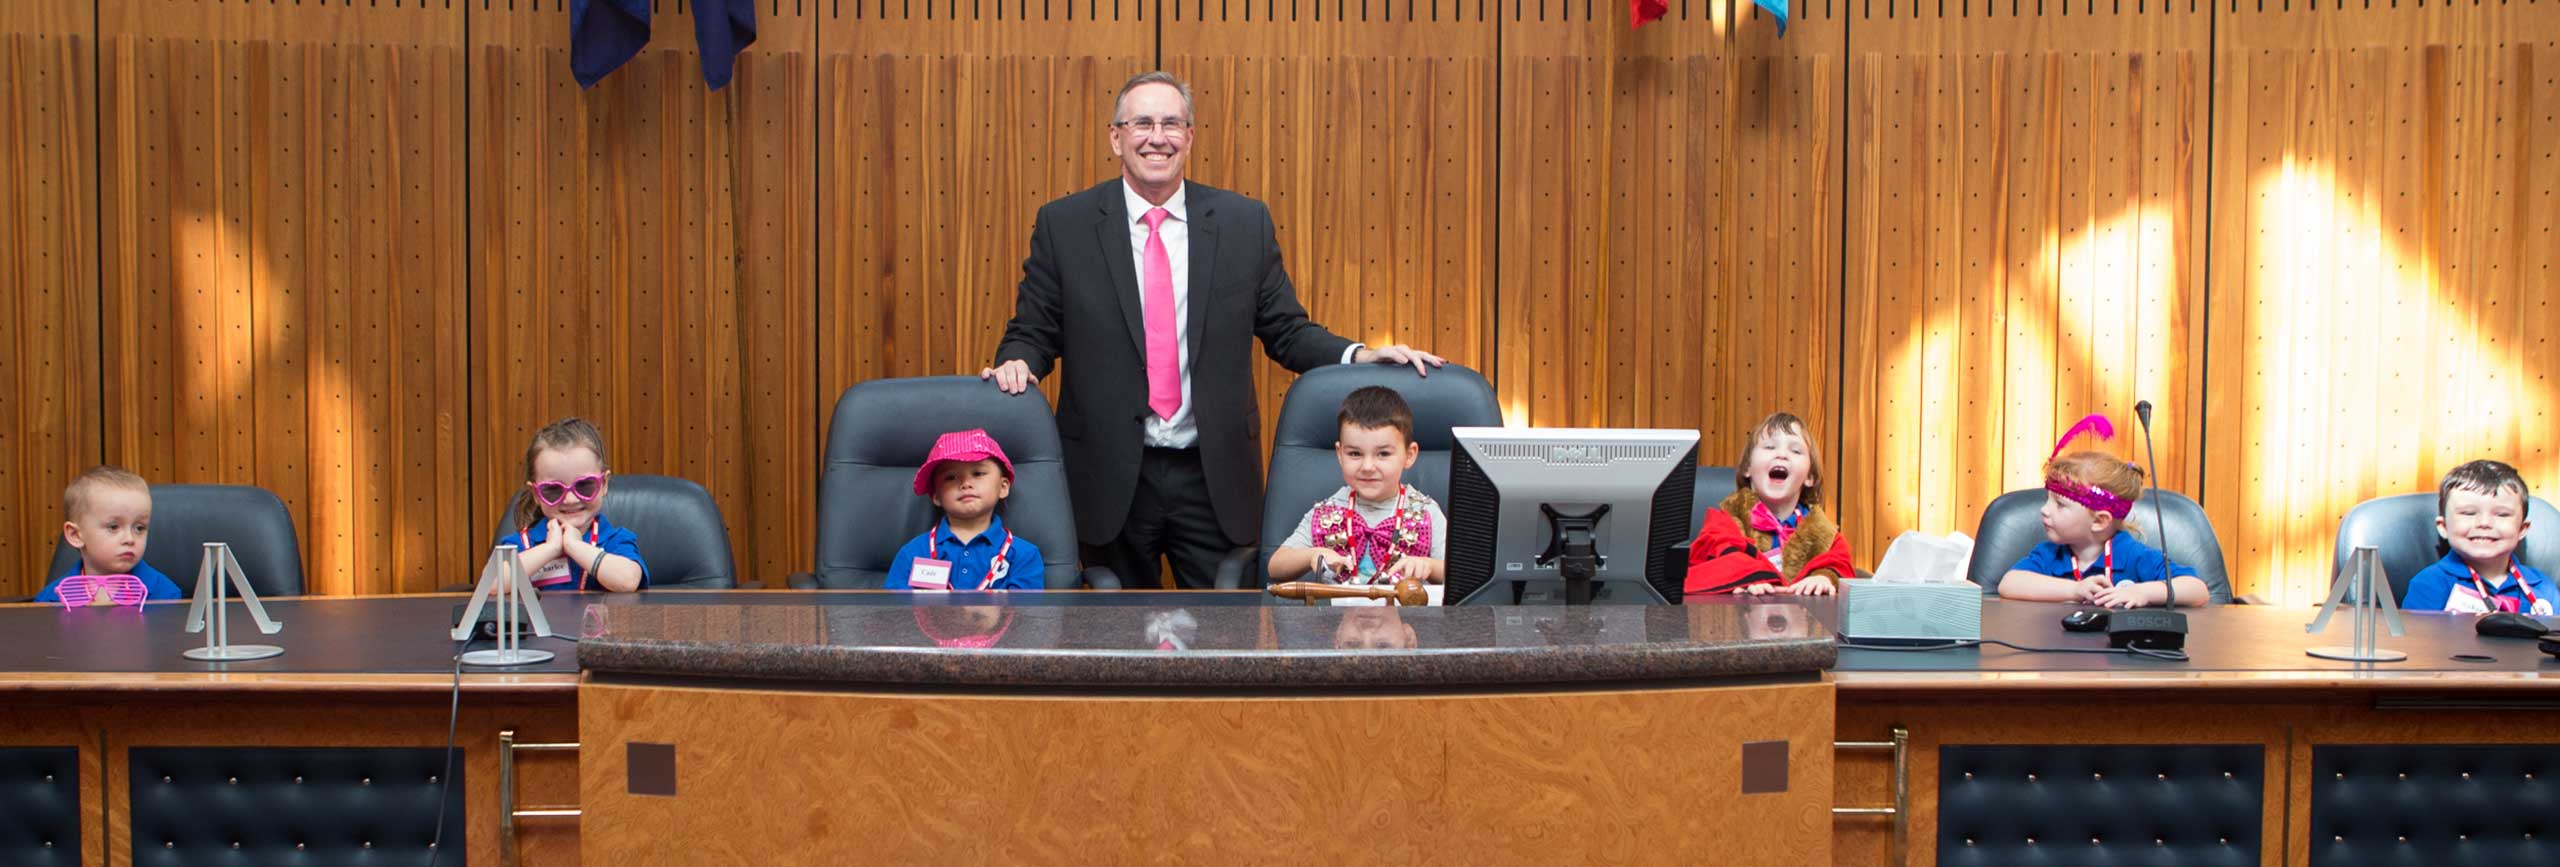 General Manager Warwick Winn (centre) in the Council Chambers with the children from Cook Parade Children’s Centre, St Clair